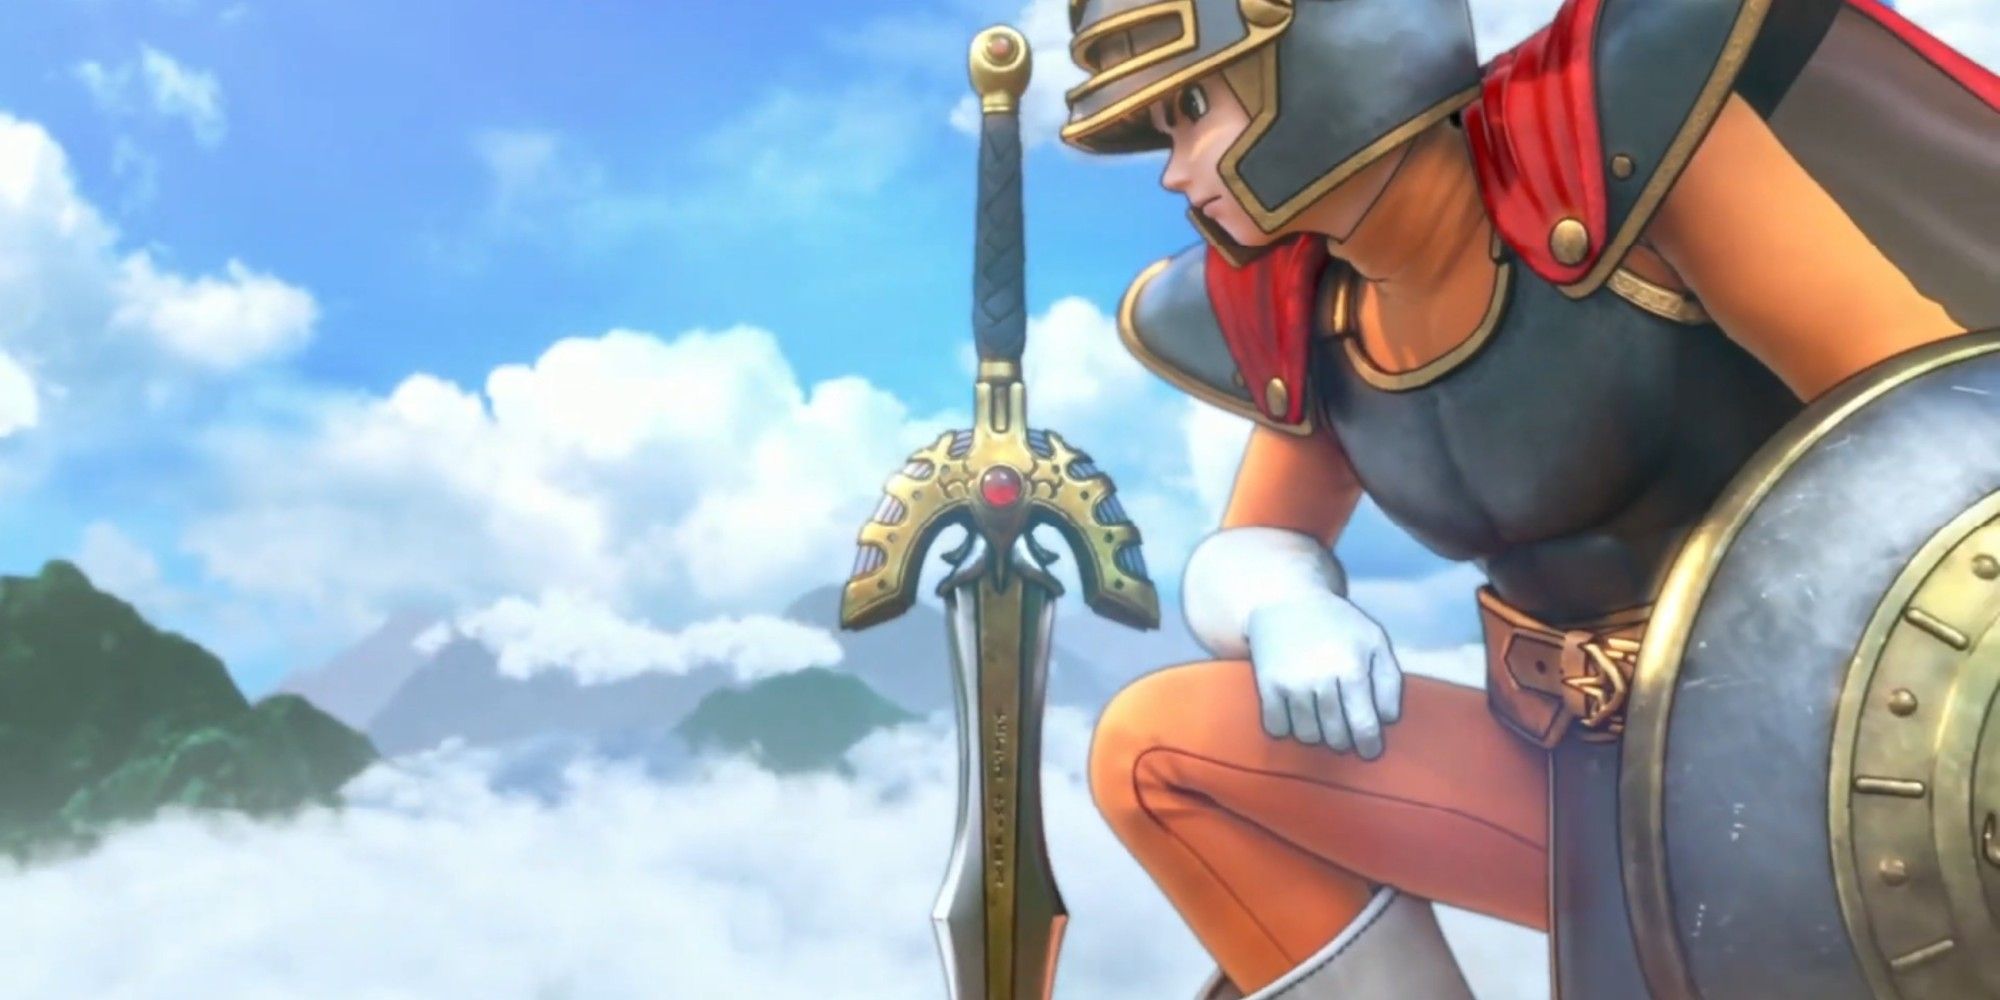 Dragon Quest XI: Erdrick's Sword Drawn For Another Battle